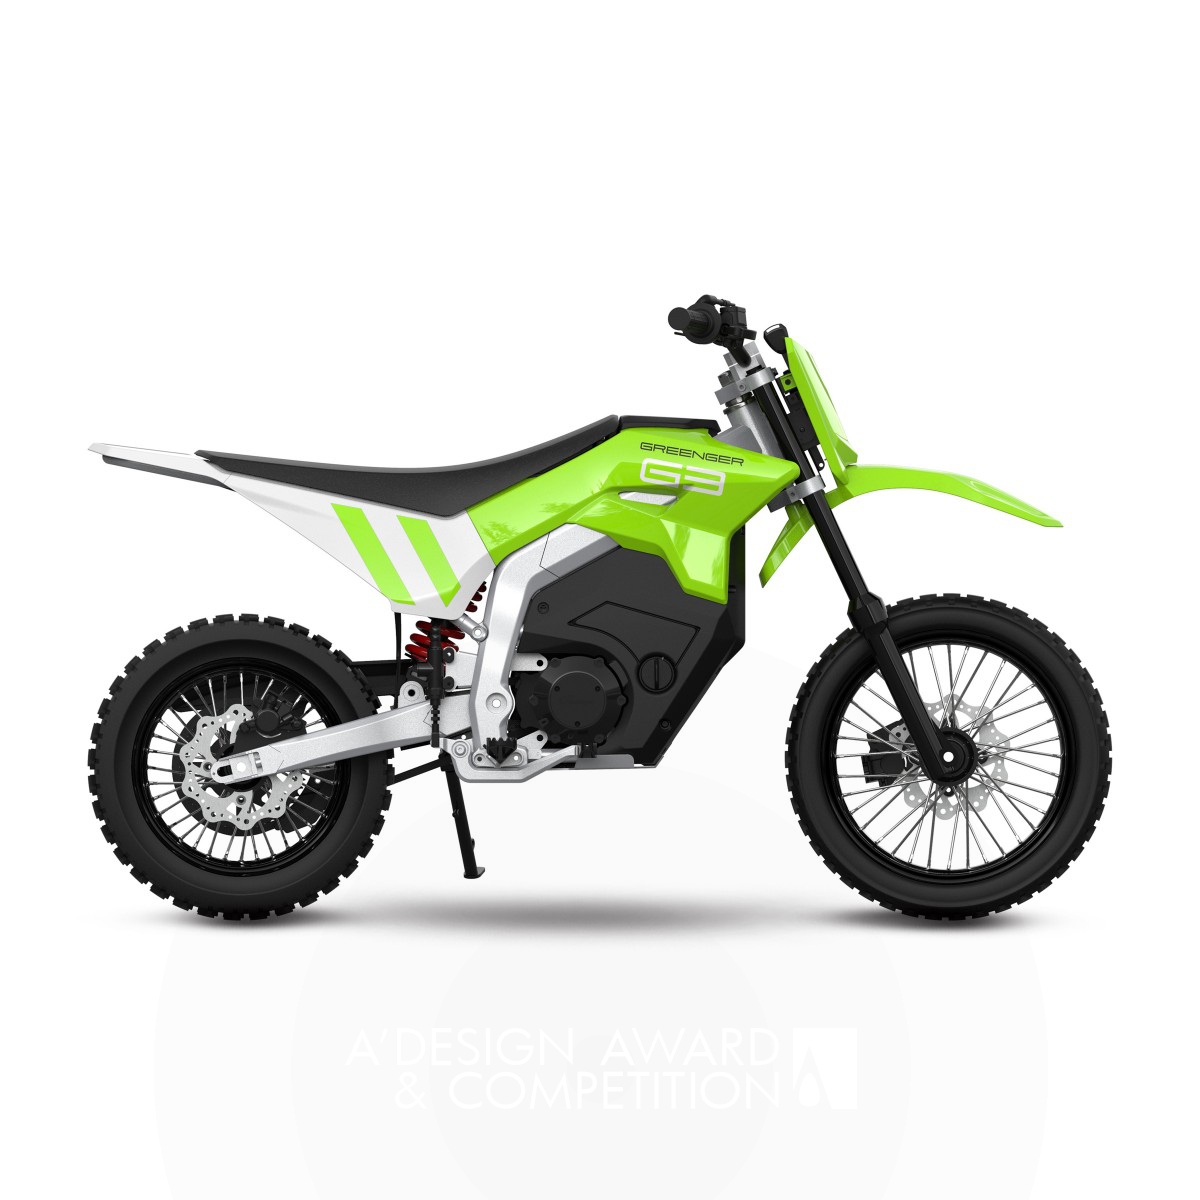 GREENGER ELETRIC TECHNOLOGY LLC wins Silver at the prestigious A' Motorcycle Design Award with Greenger G3 Electric Dirtbike.